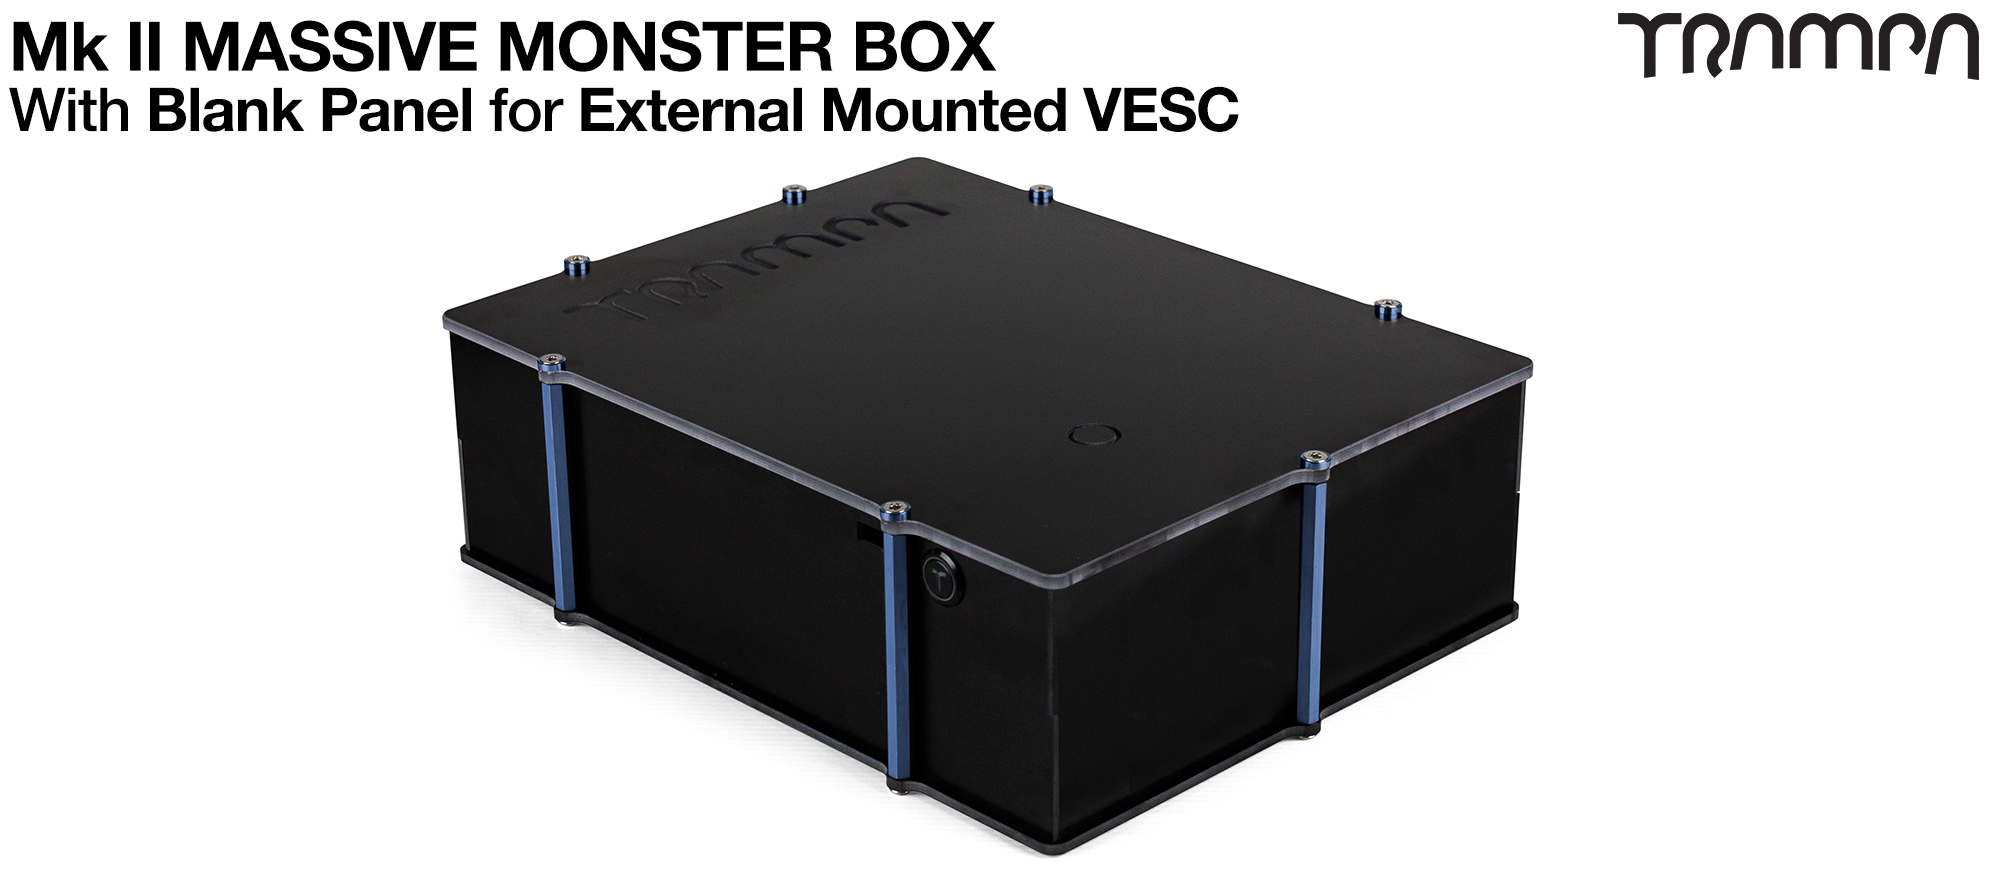 2WD Mk II MASSIVE MONSTER Box Capable of fitting 84x 21700 Li-Ion cells or 2x huge Li-Po Cells, with up to 2x VESC 6 or 1x HD-60T